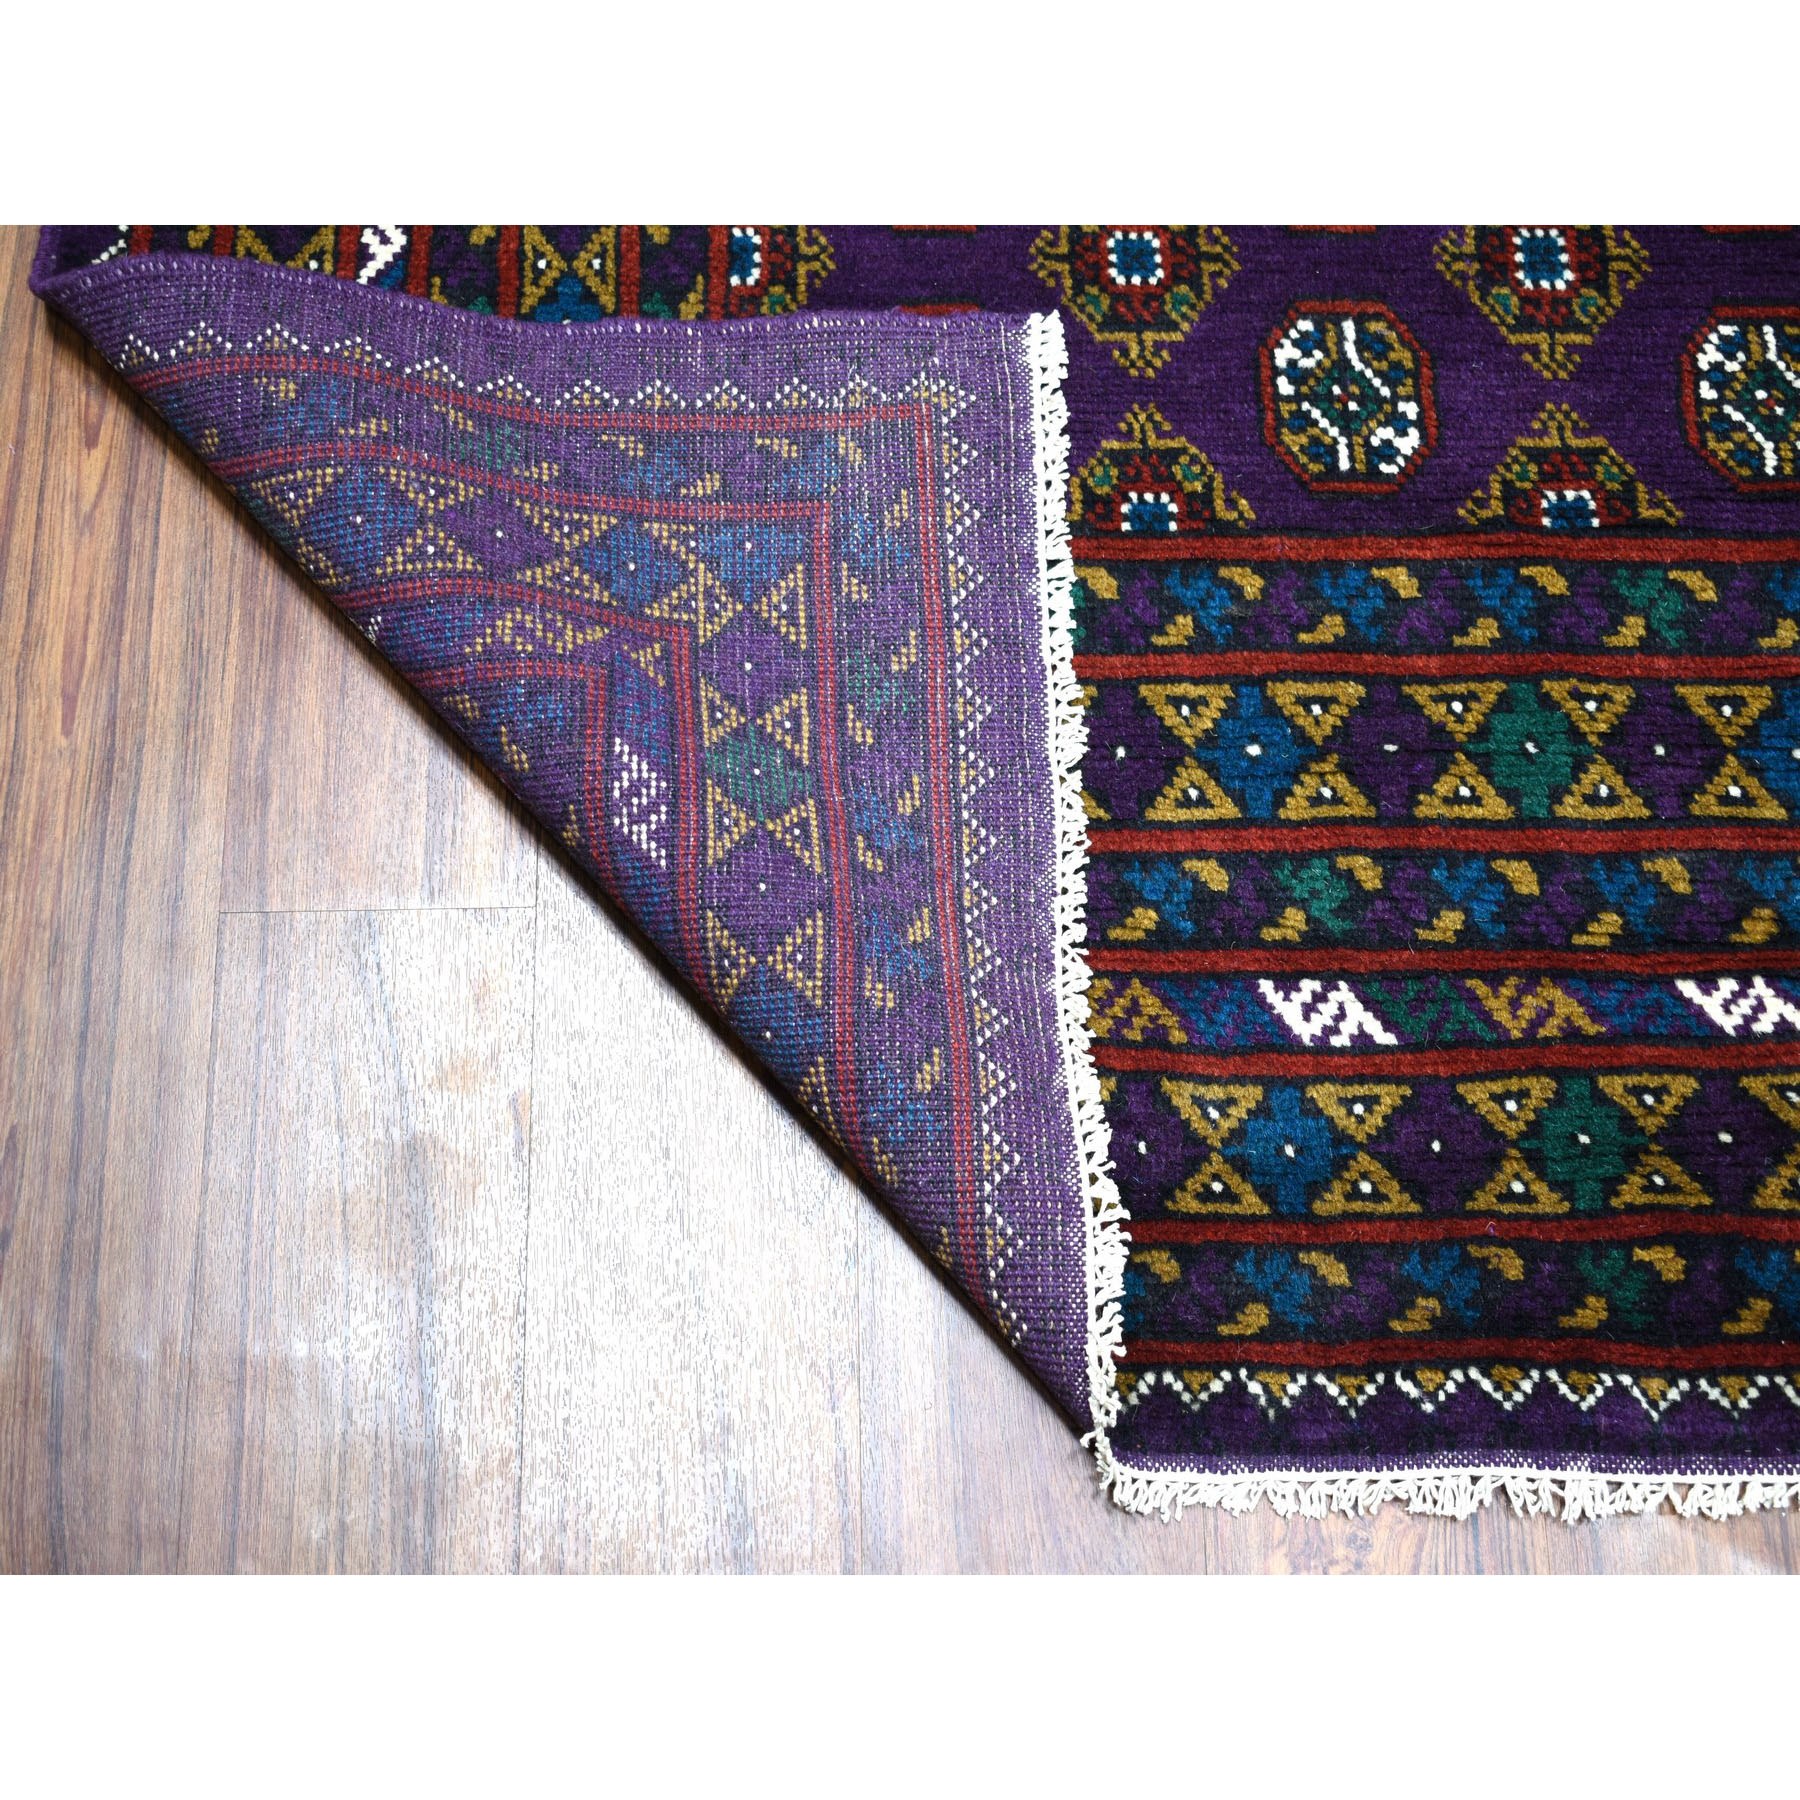 6'7"x9'4" Purple Colorful Afghan Baluch Hand Woven Tribal Design Pure Wool Oriental Rug 